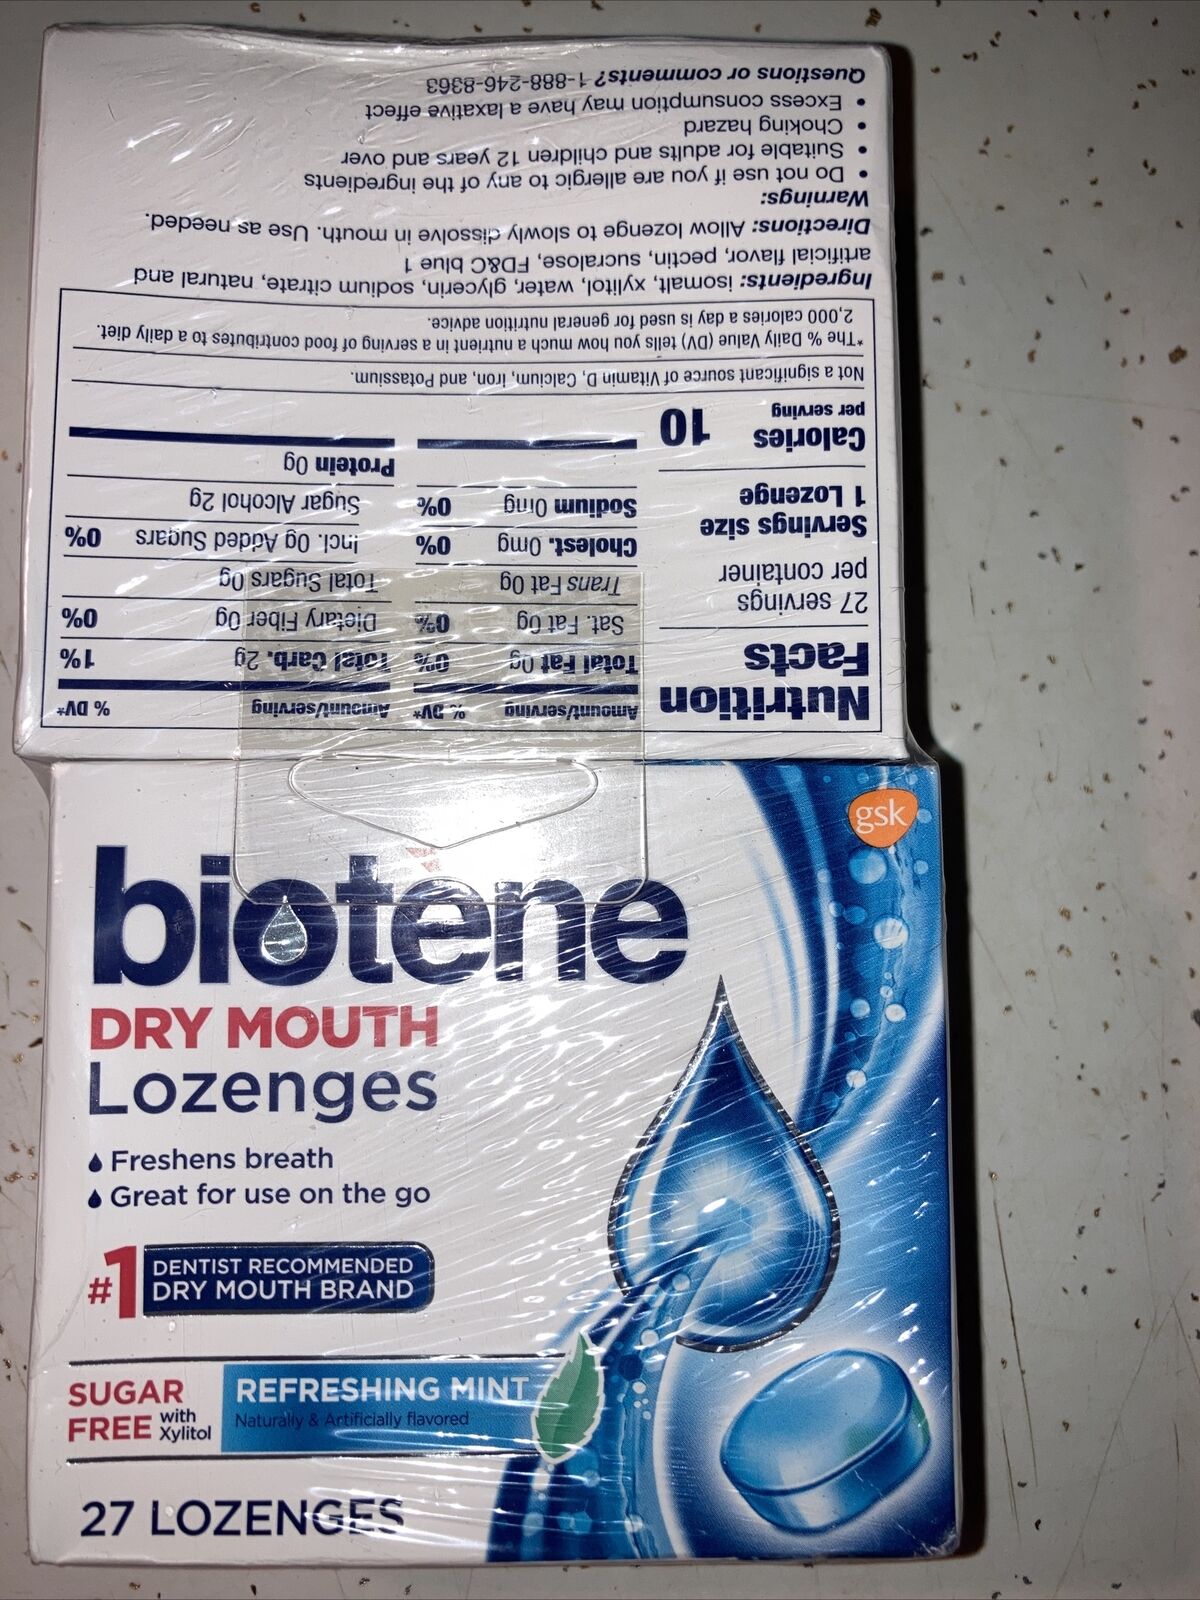 Biotene Dry Mouth Lozenges. Mint Flavor. 2pack Expiration Date Is 01/2021